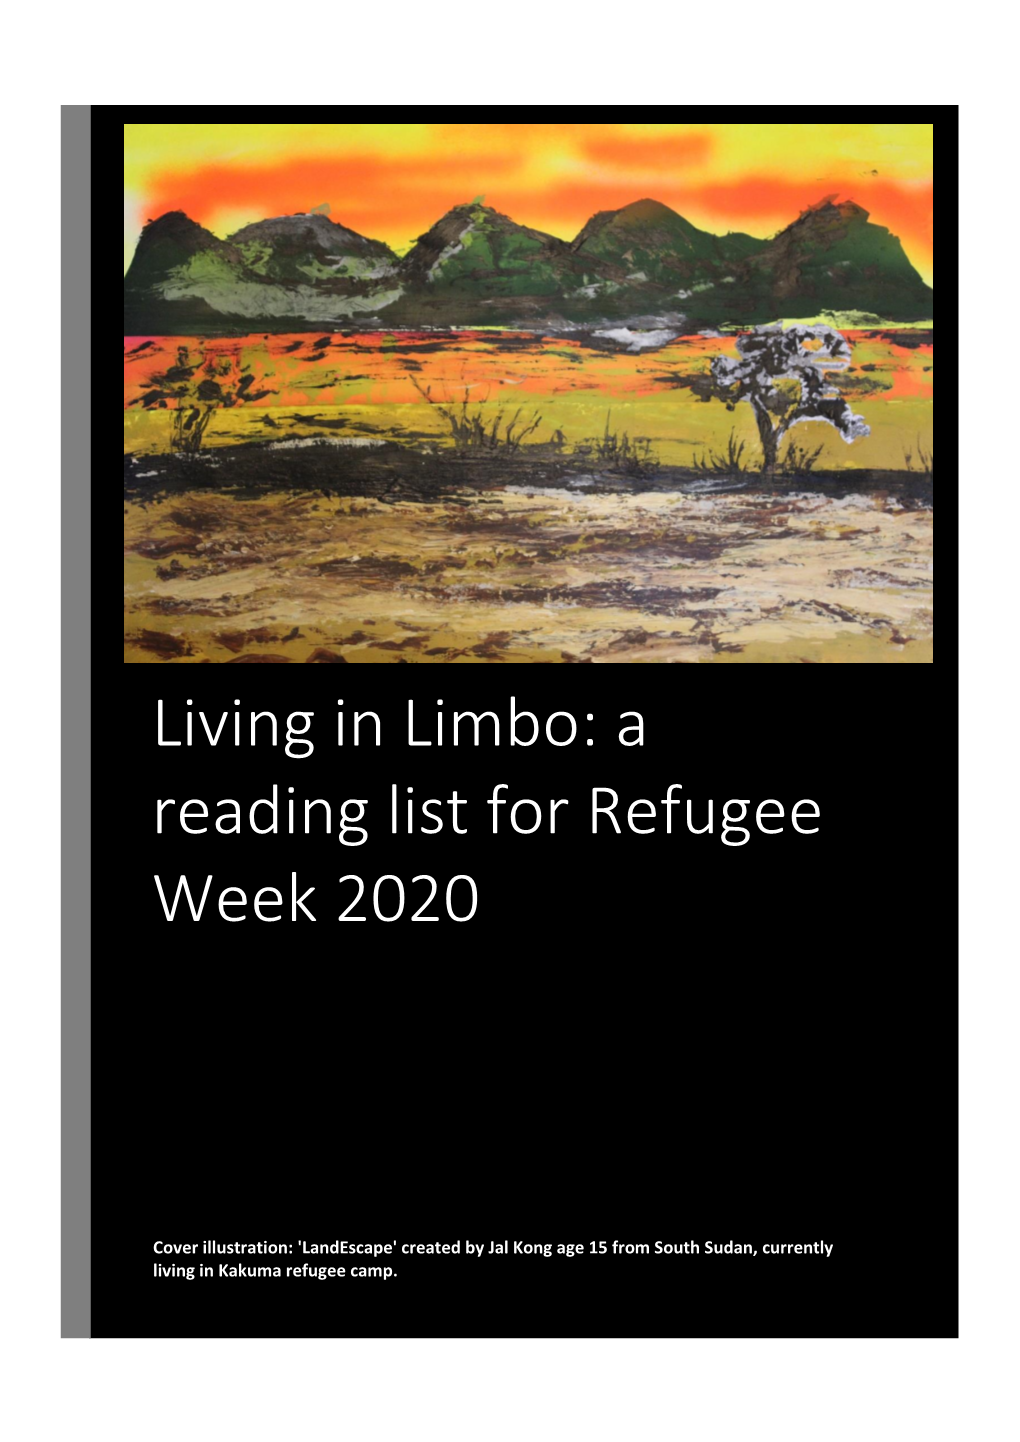 A Reading List for Refugee Week 2020